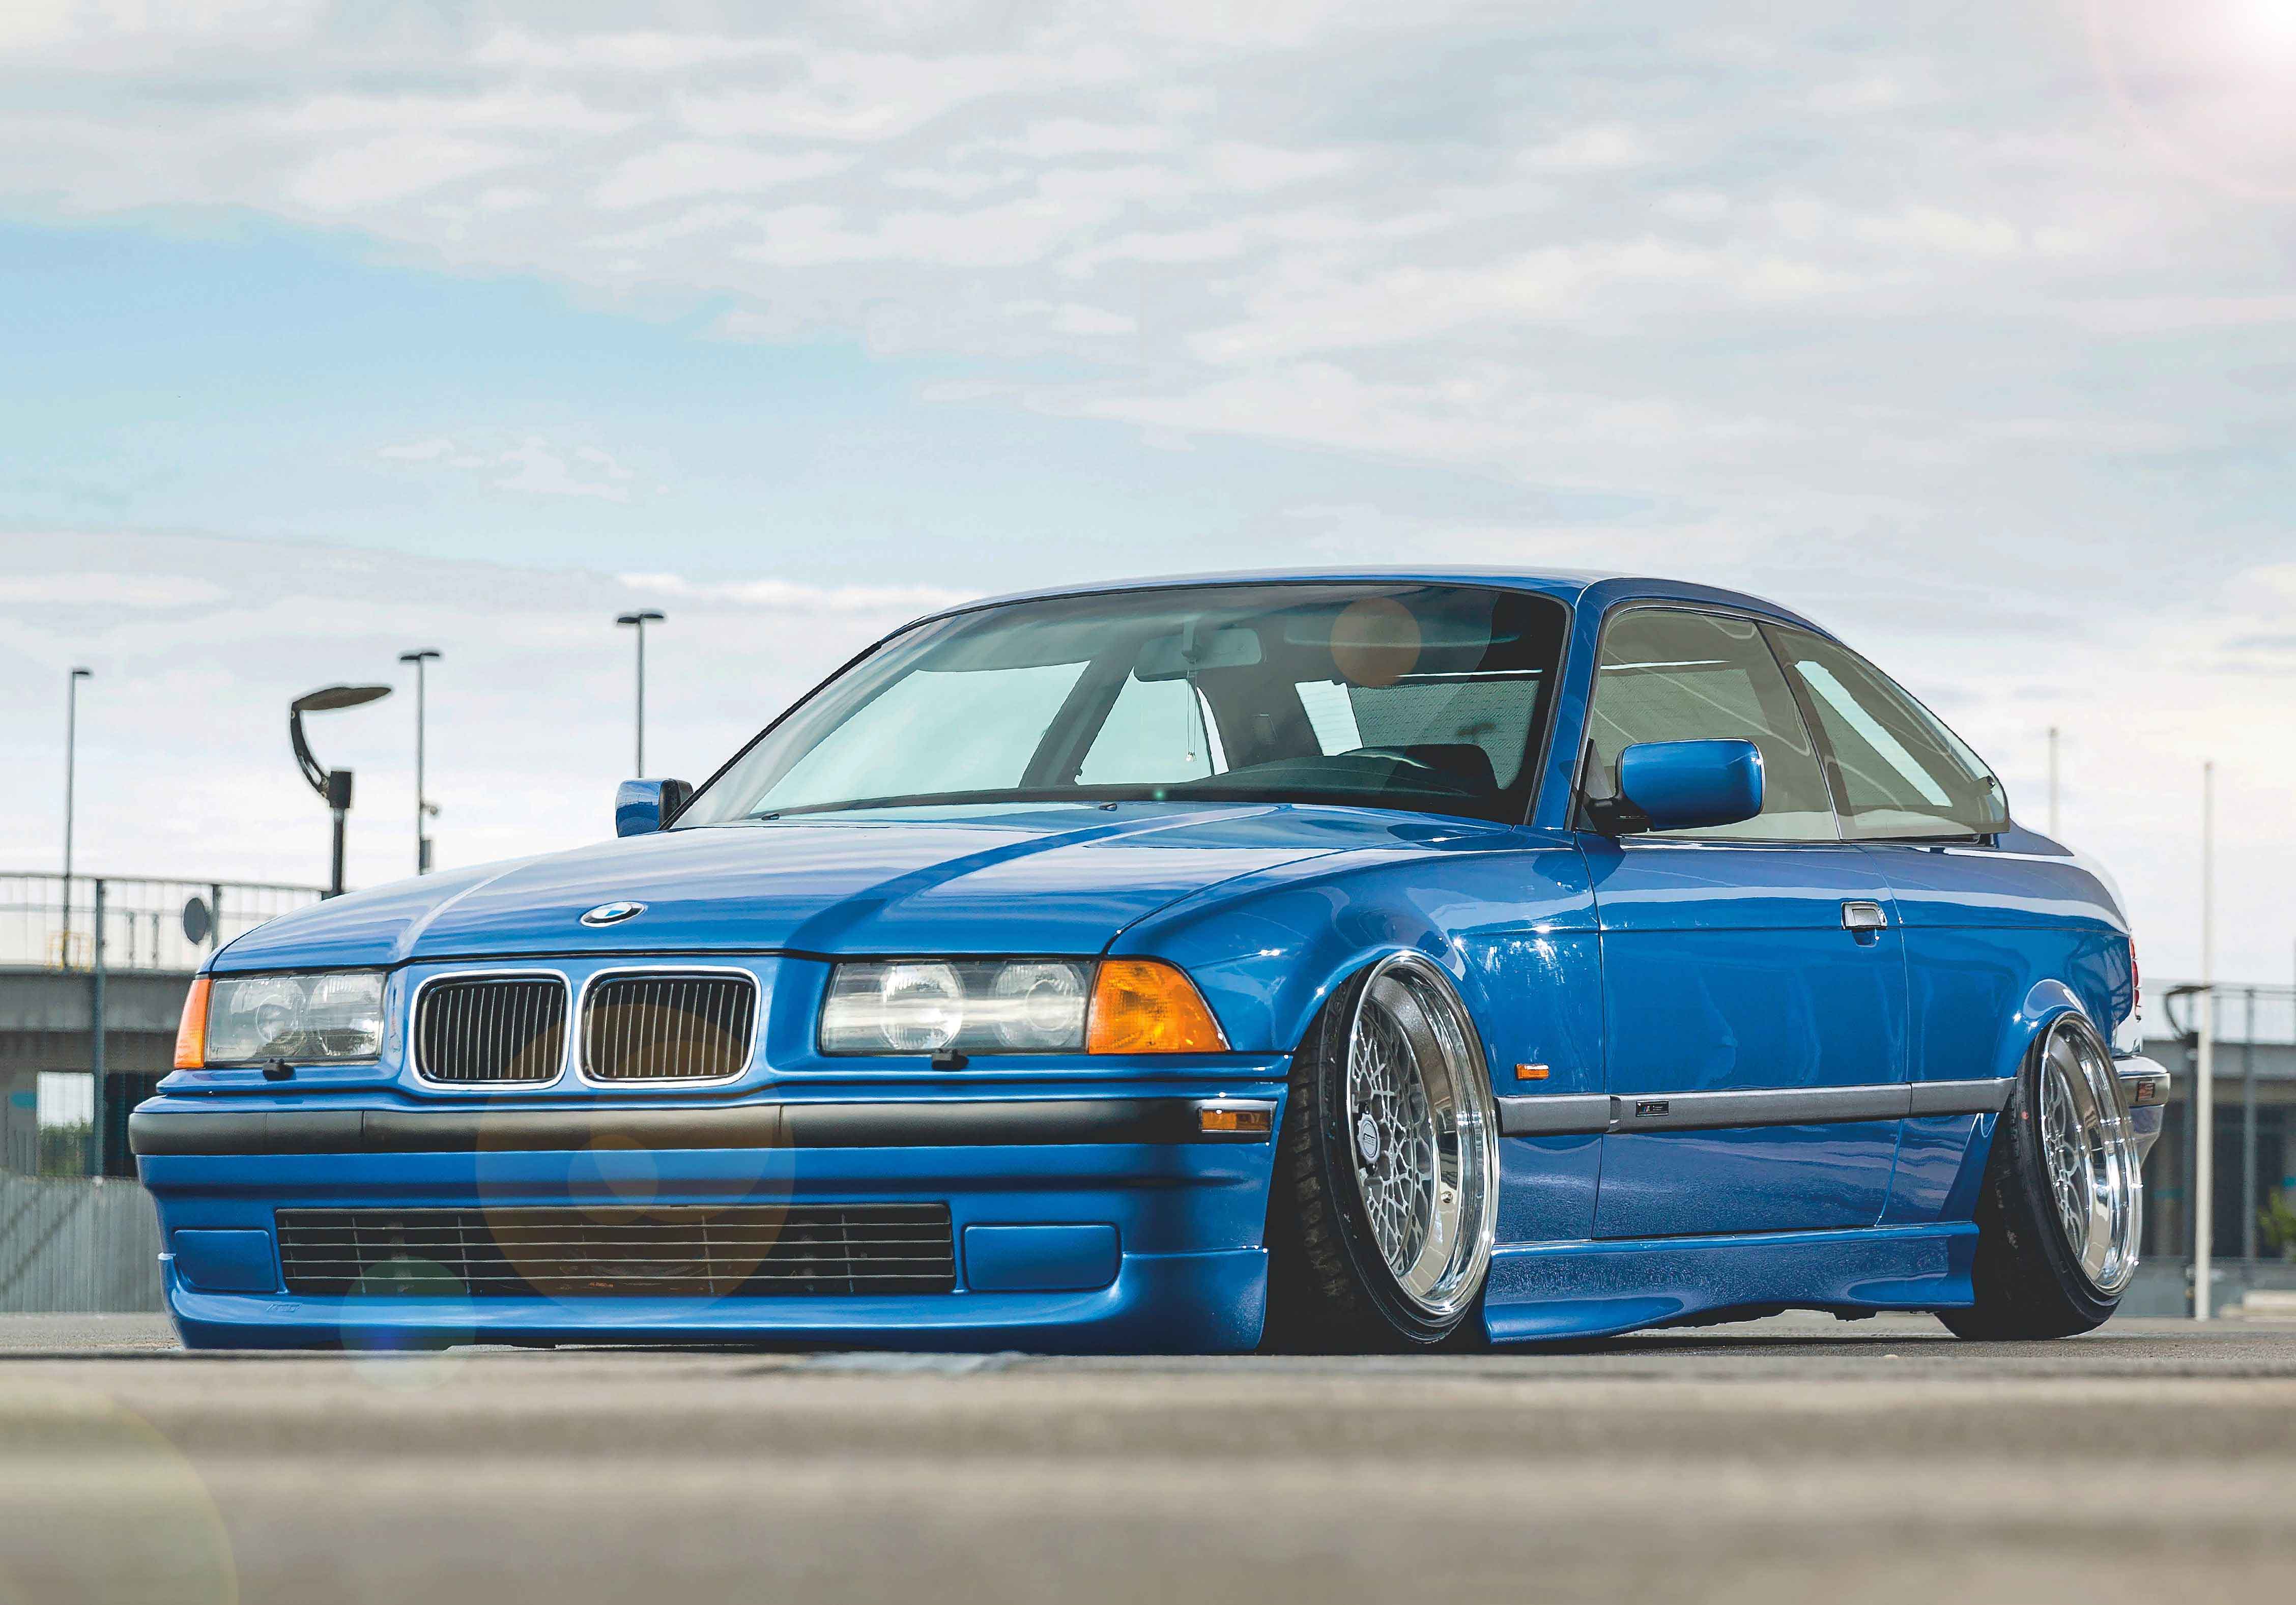 USDM-styled air-ride 1997 BMW 320i Coupe Clubsport E36 - Drive-My Blogs